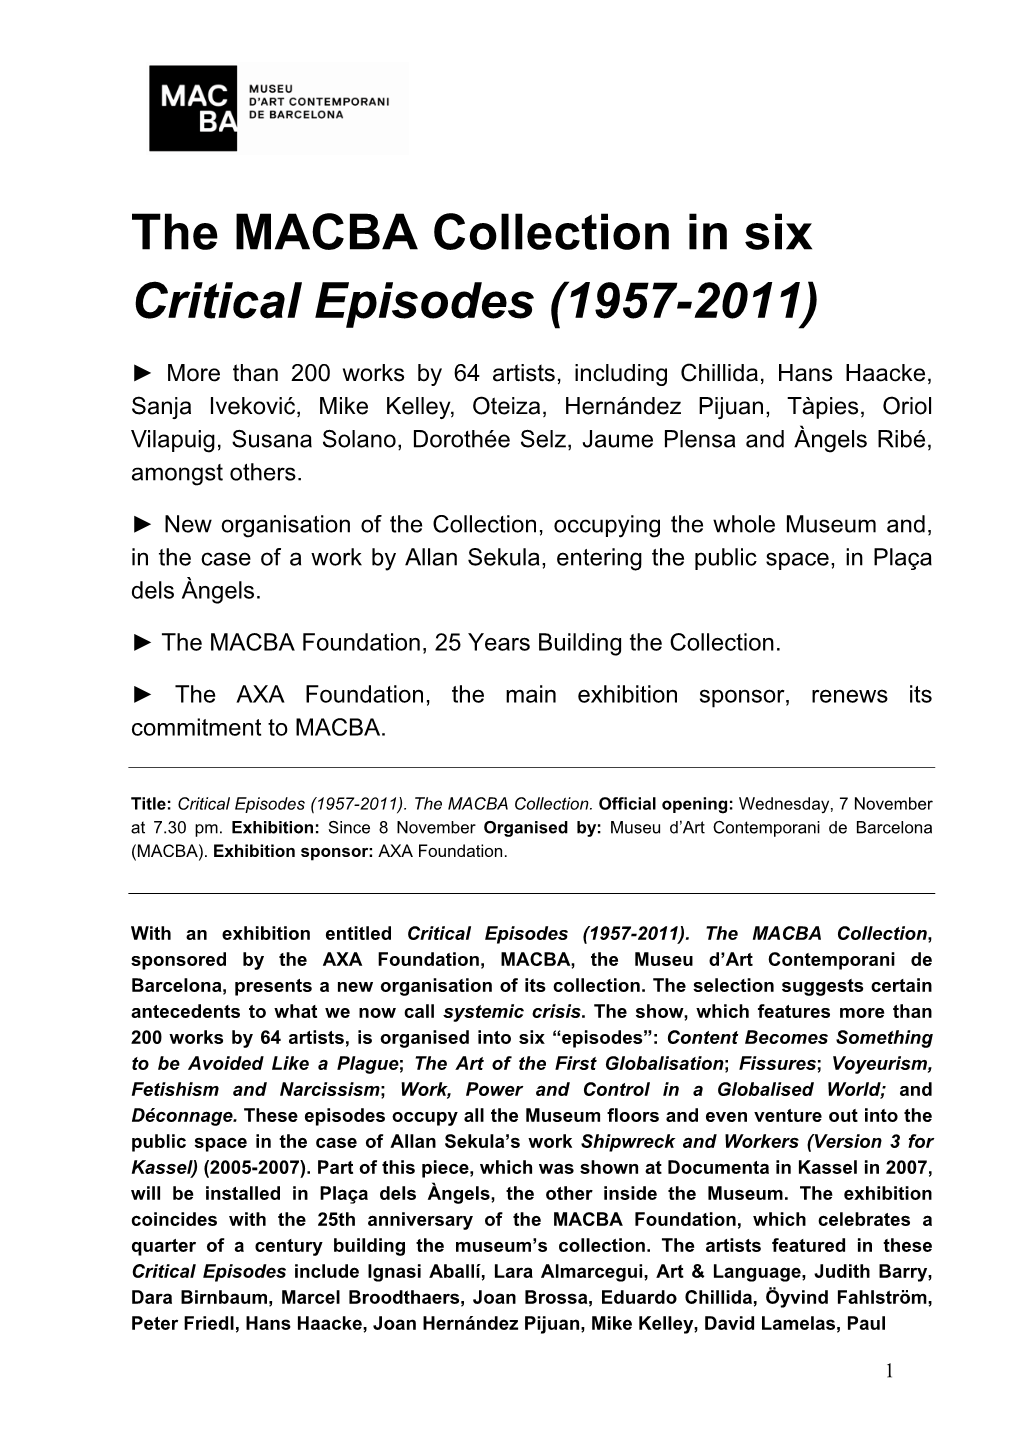 The MACBA Collection in Six Critical Episodes (1957-2011)